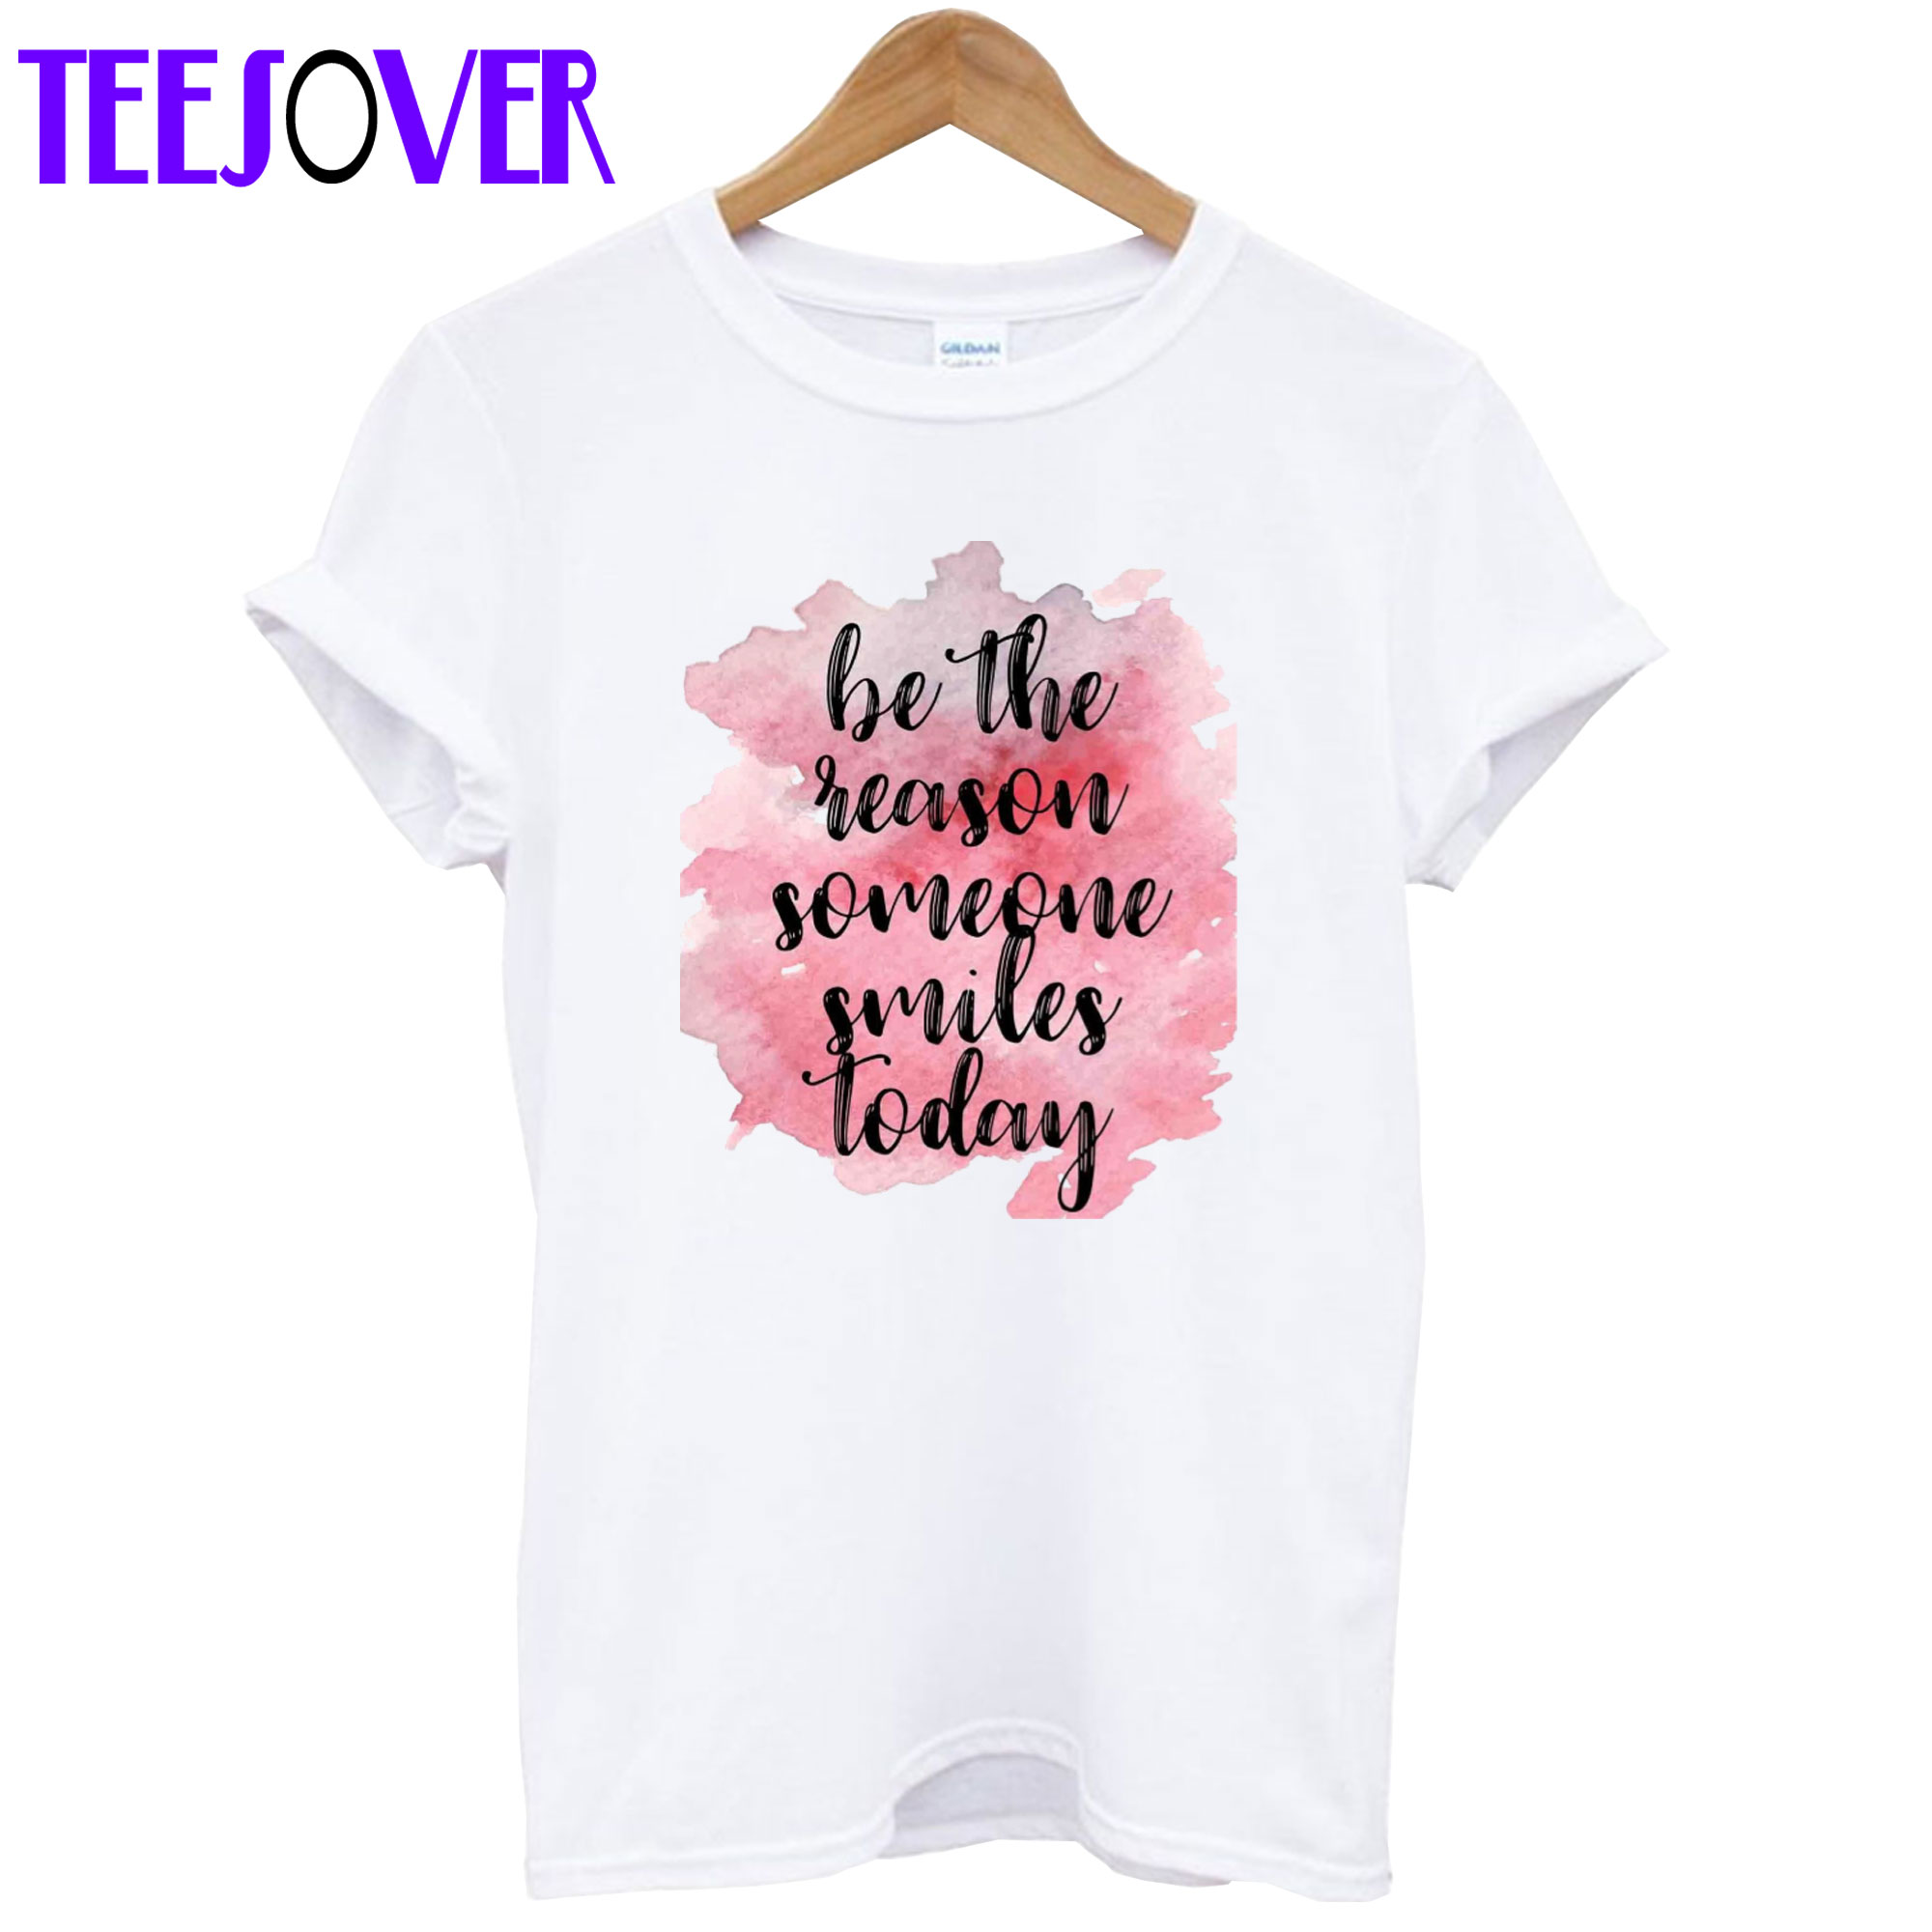 Be the season someone smile today t shirt